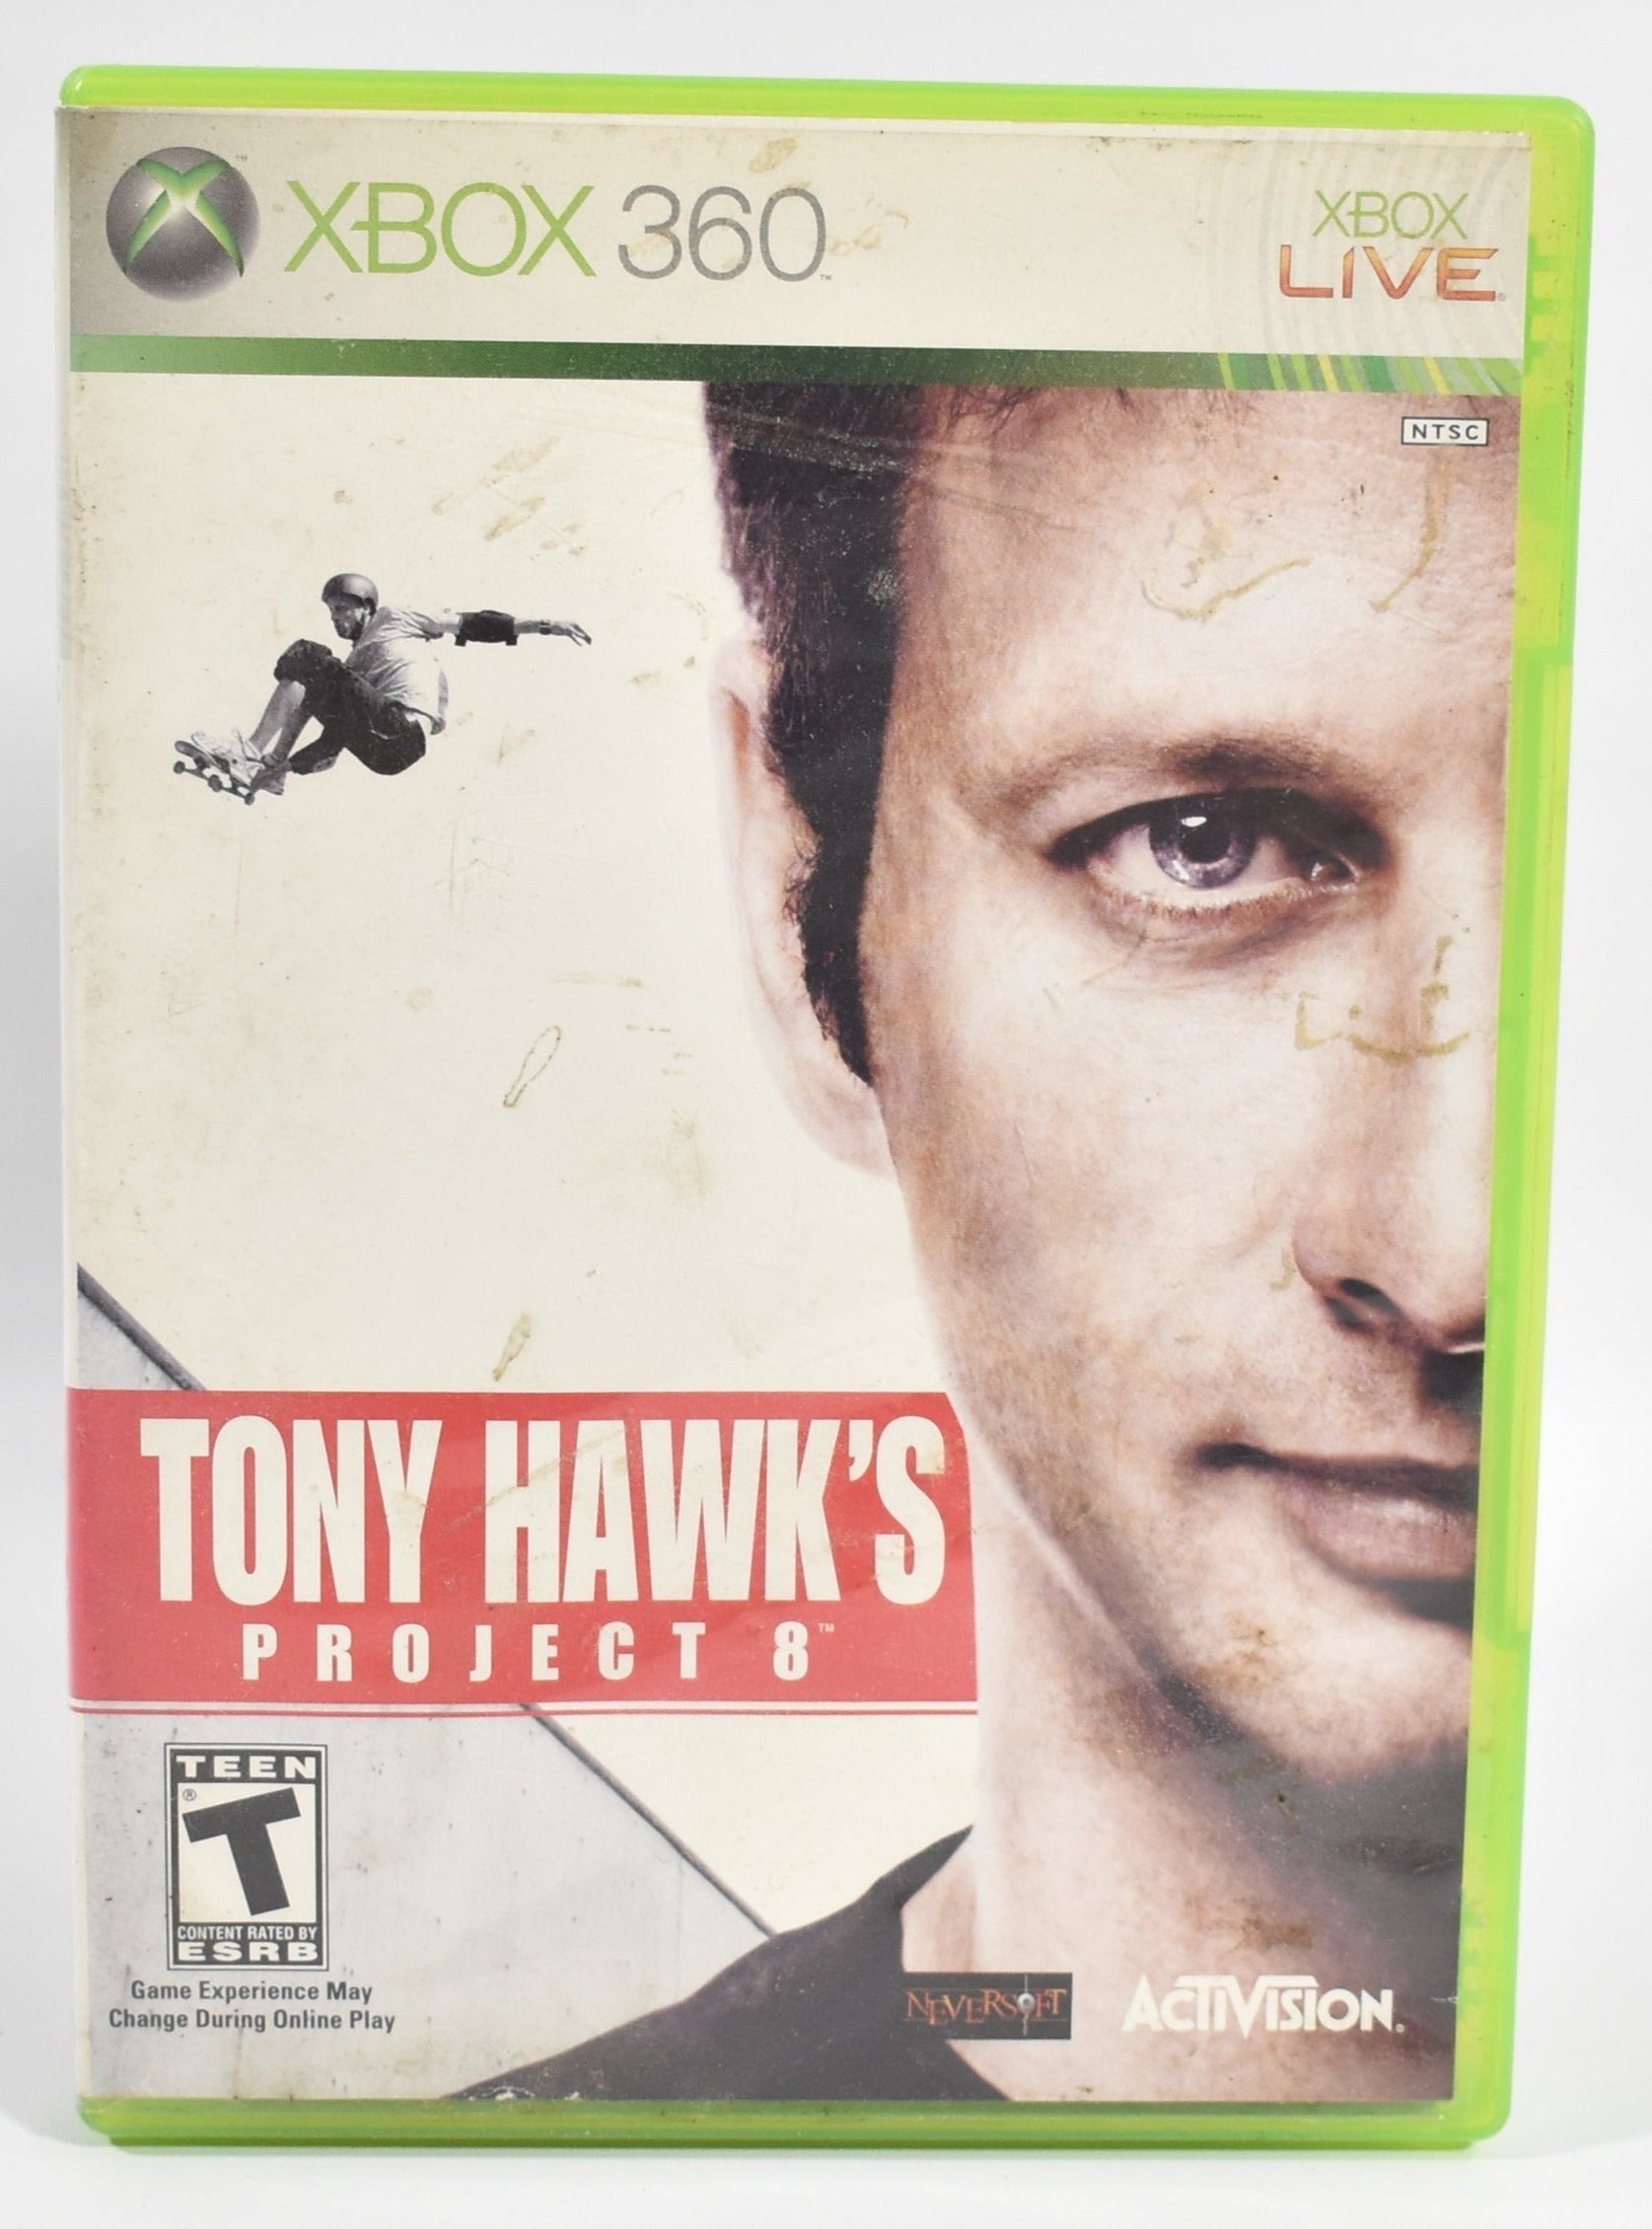 Xbox 360 Video Game Tony Hawks Project 8 Game Used